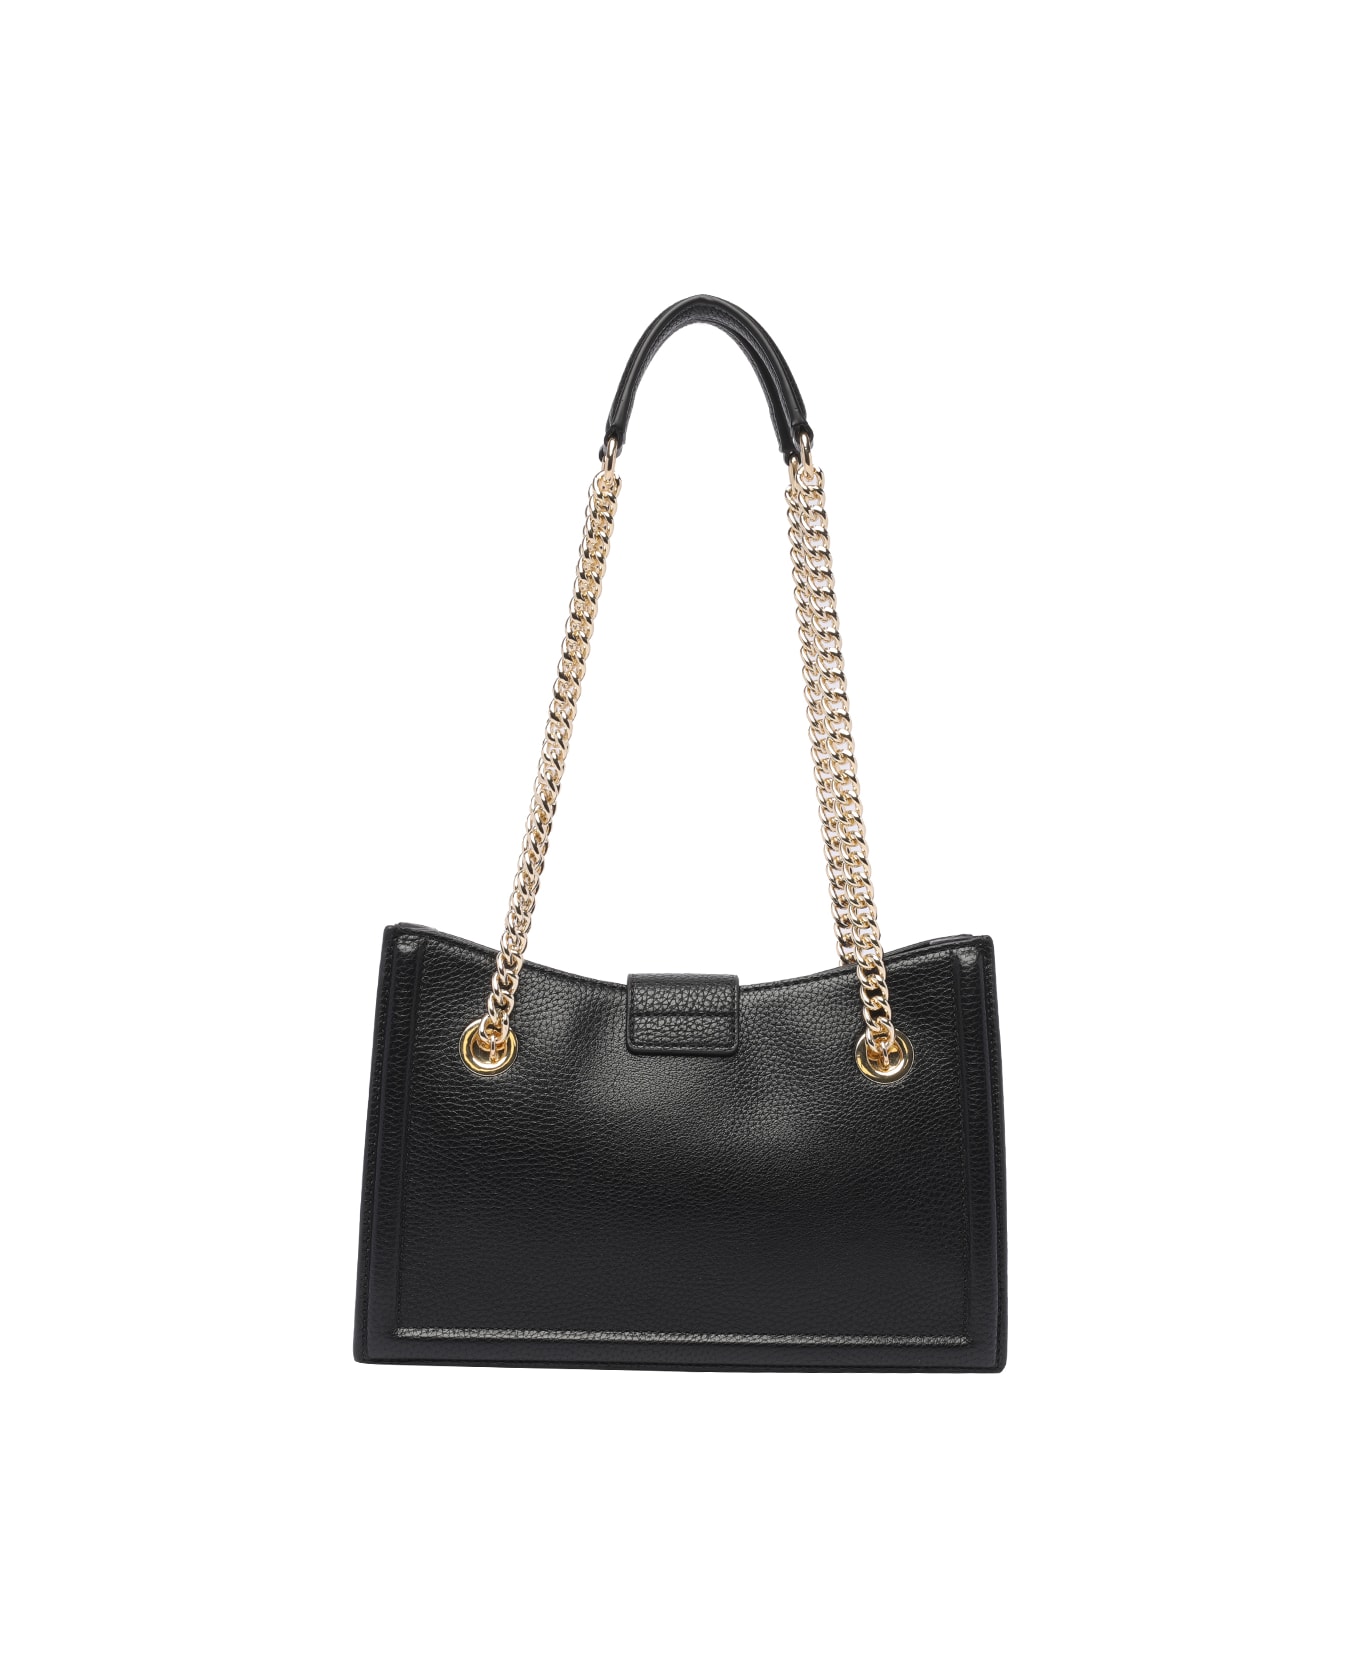 Versace Jeans Couture Embossed Buckle Bag - Black トートバッグ